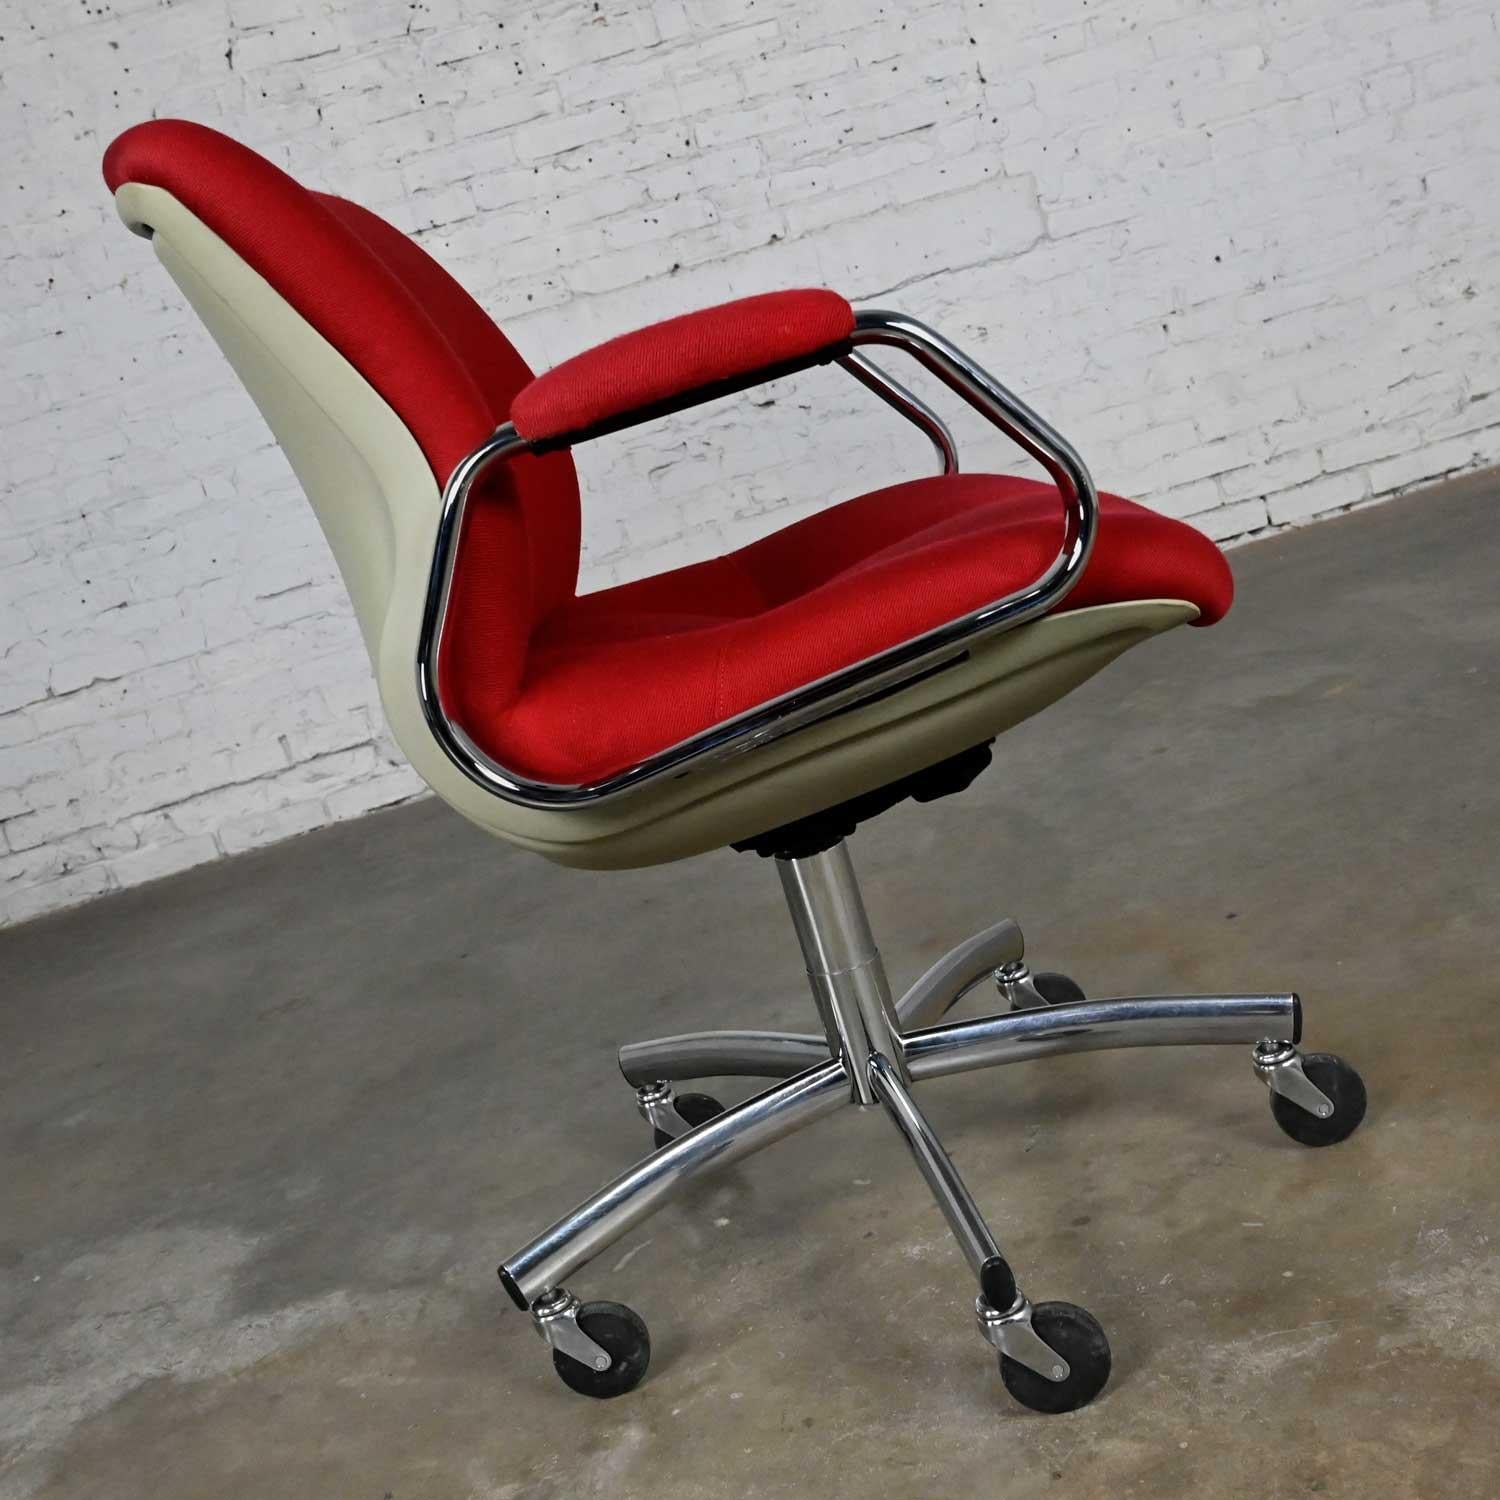 Modern Steelcase Chrome & Red Swivel Rolling Chair #454 Style Charles Pollock In Good Condition For Sale In Topeka, KS